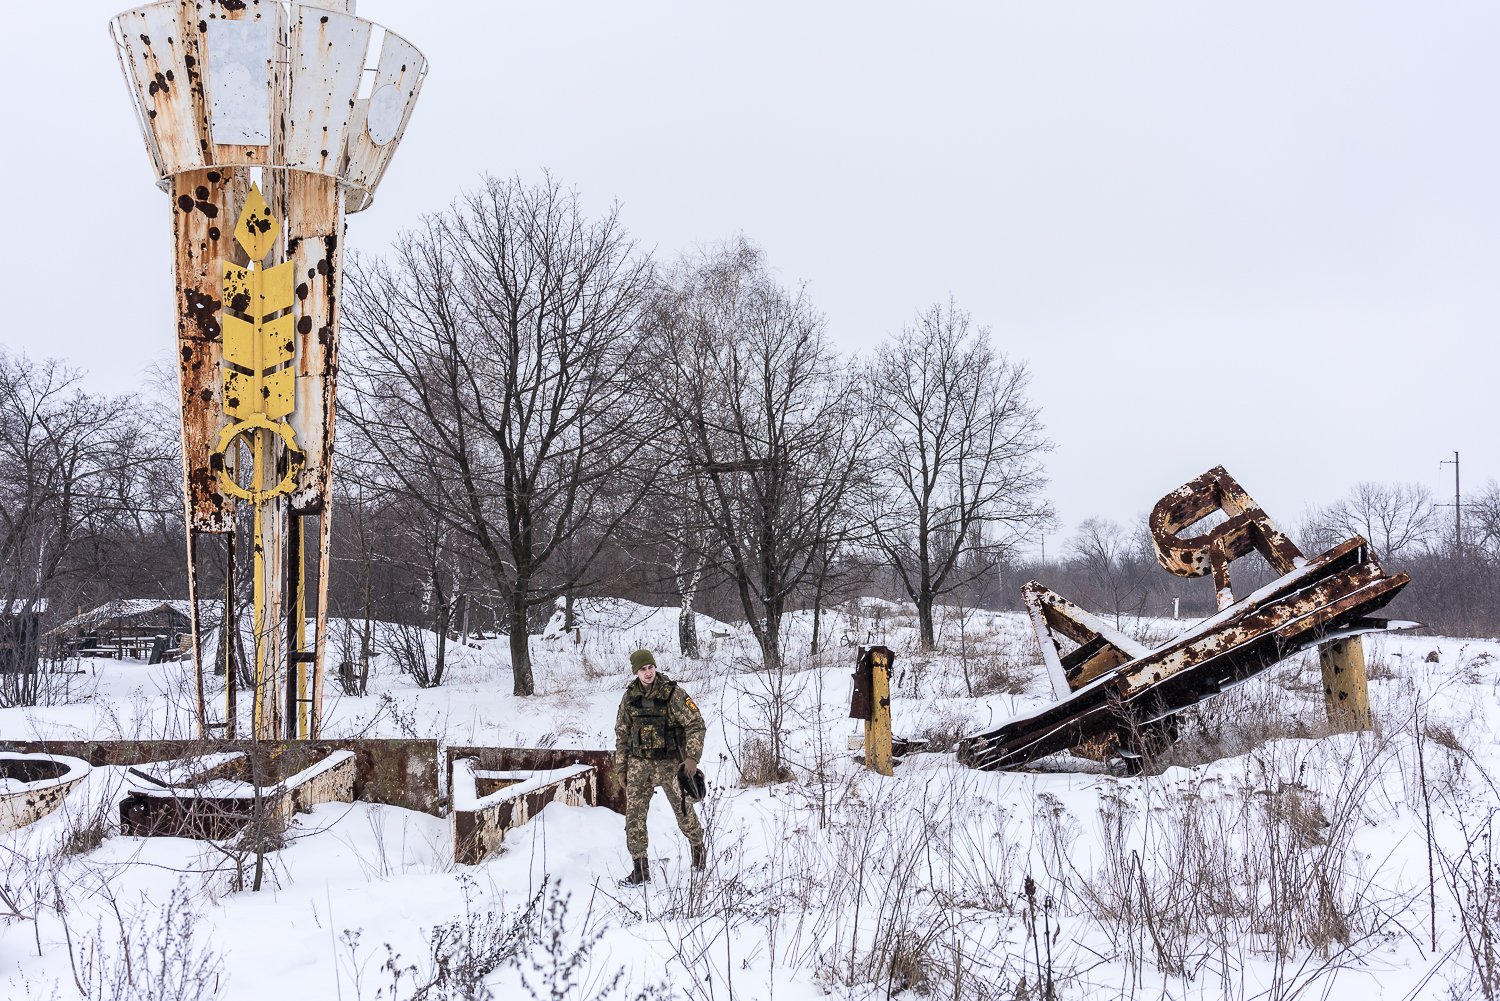  A Ukrainian soldier with the 24th brigade walks near a destroyed sign at the entrance to the front-line city on Monday, January 24, 2022 in Popasna, Ukraine. 